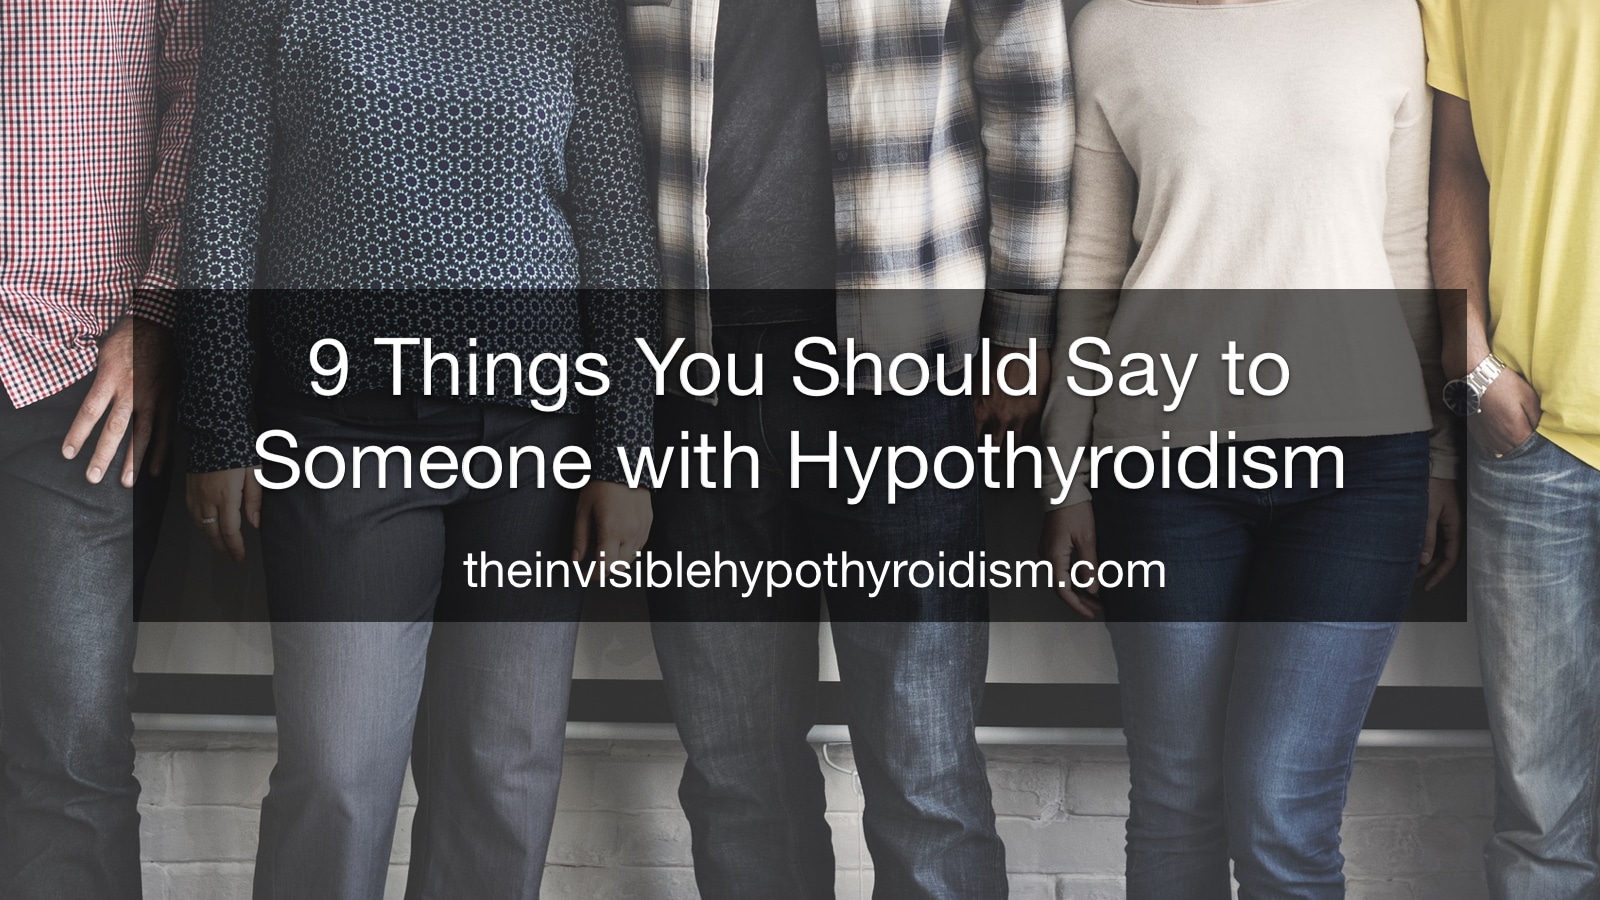 9 Things You Should Say to Someone with Hypothyroidism